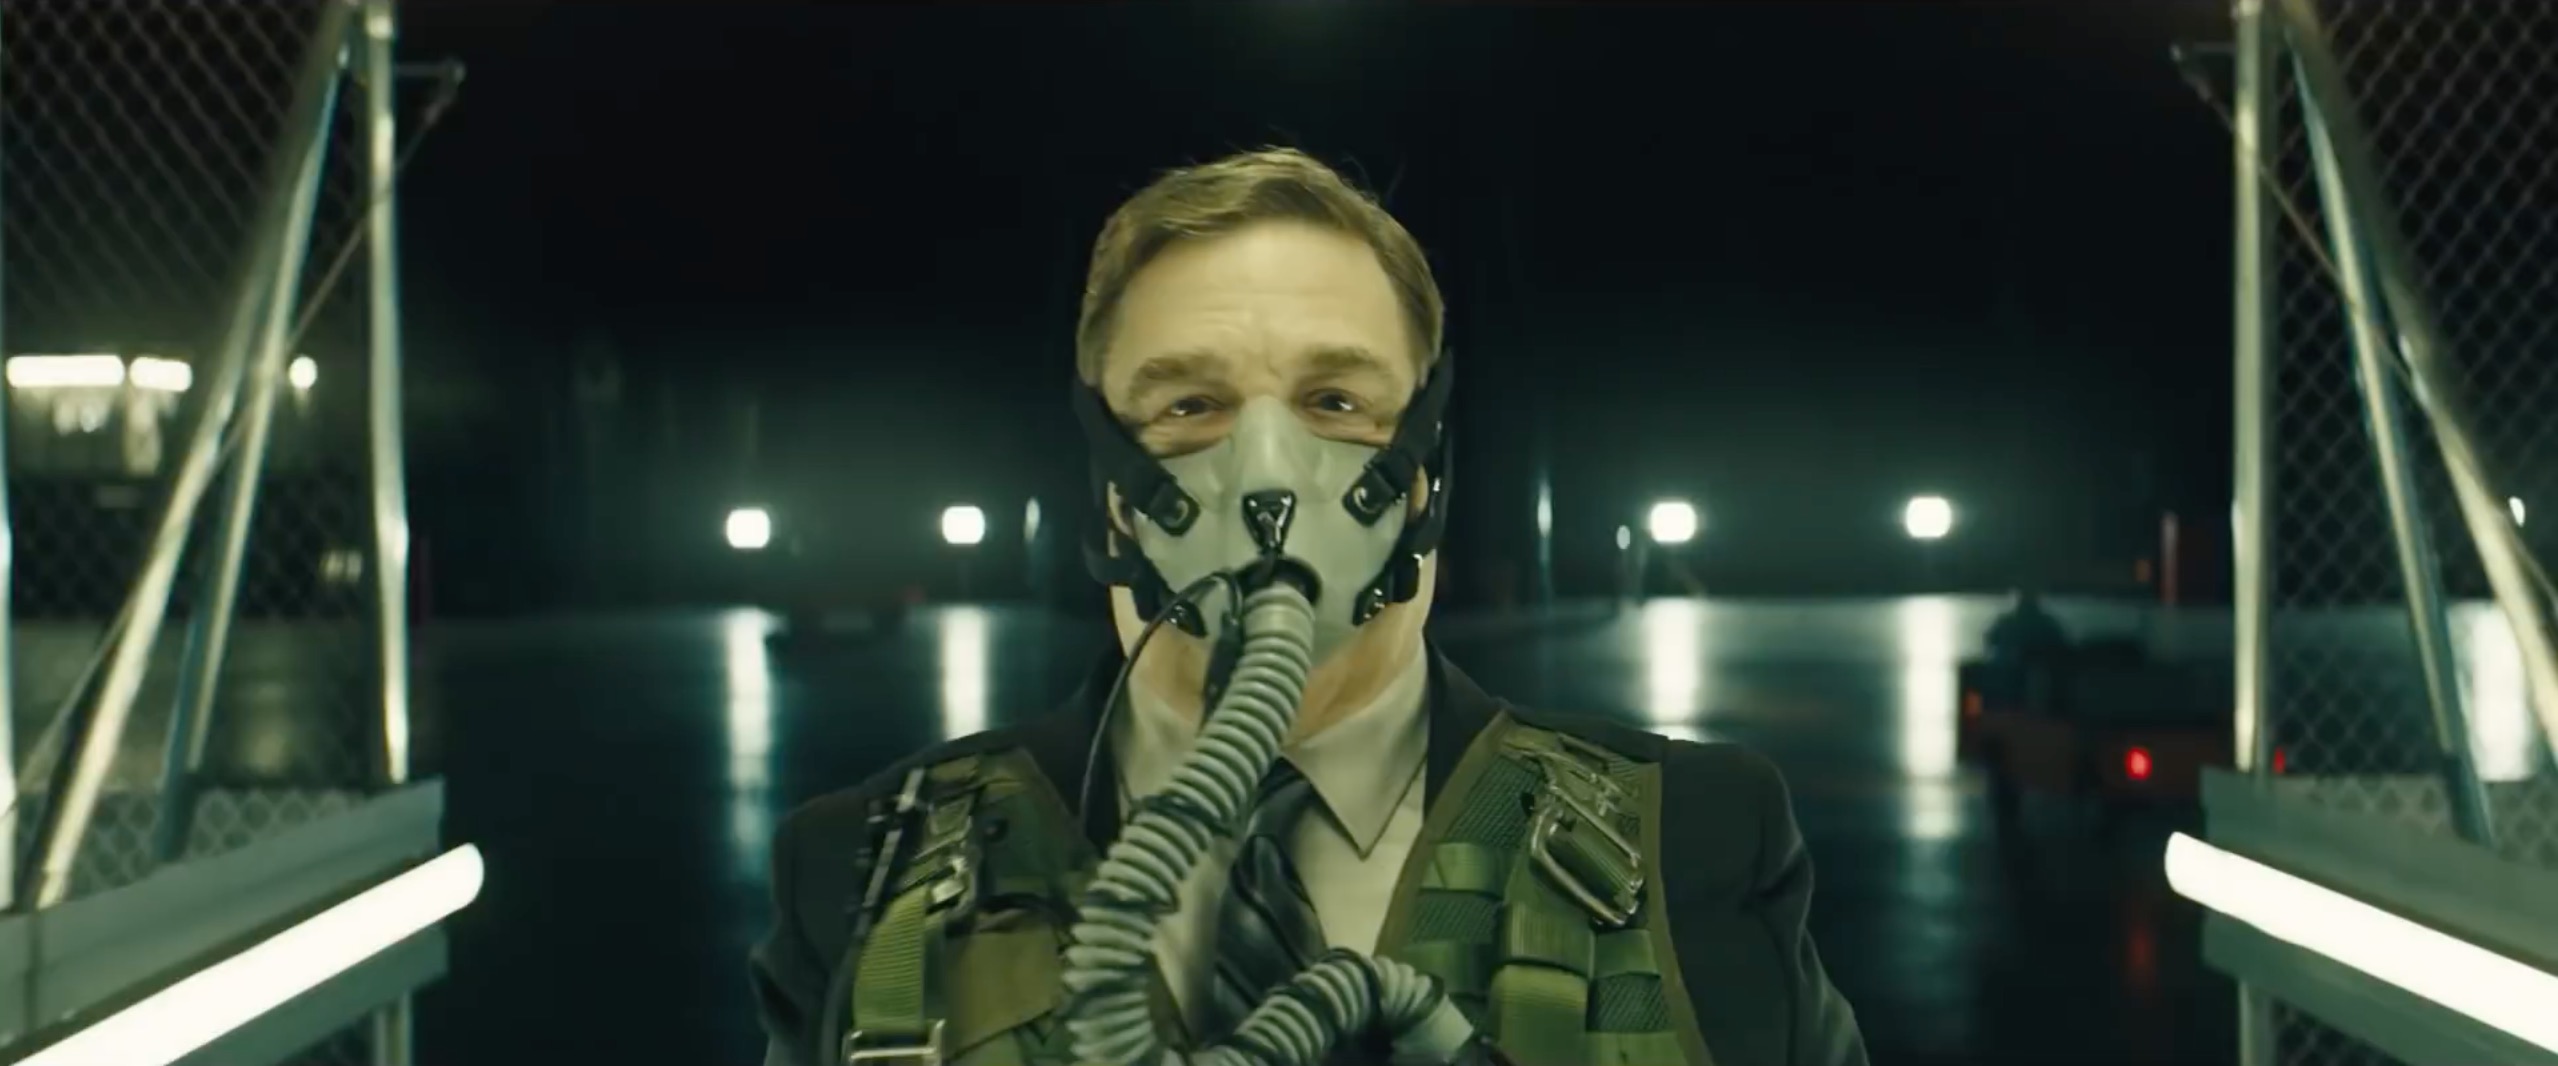 Captive State Trailer Takes A Peek At An Eerily Oppressed Country